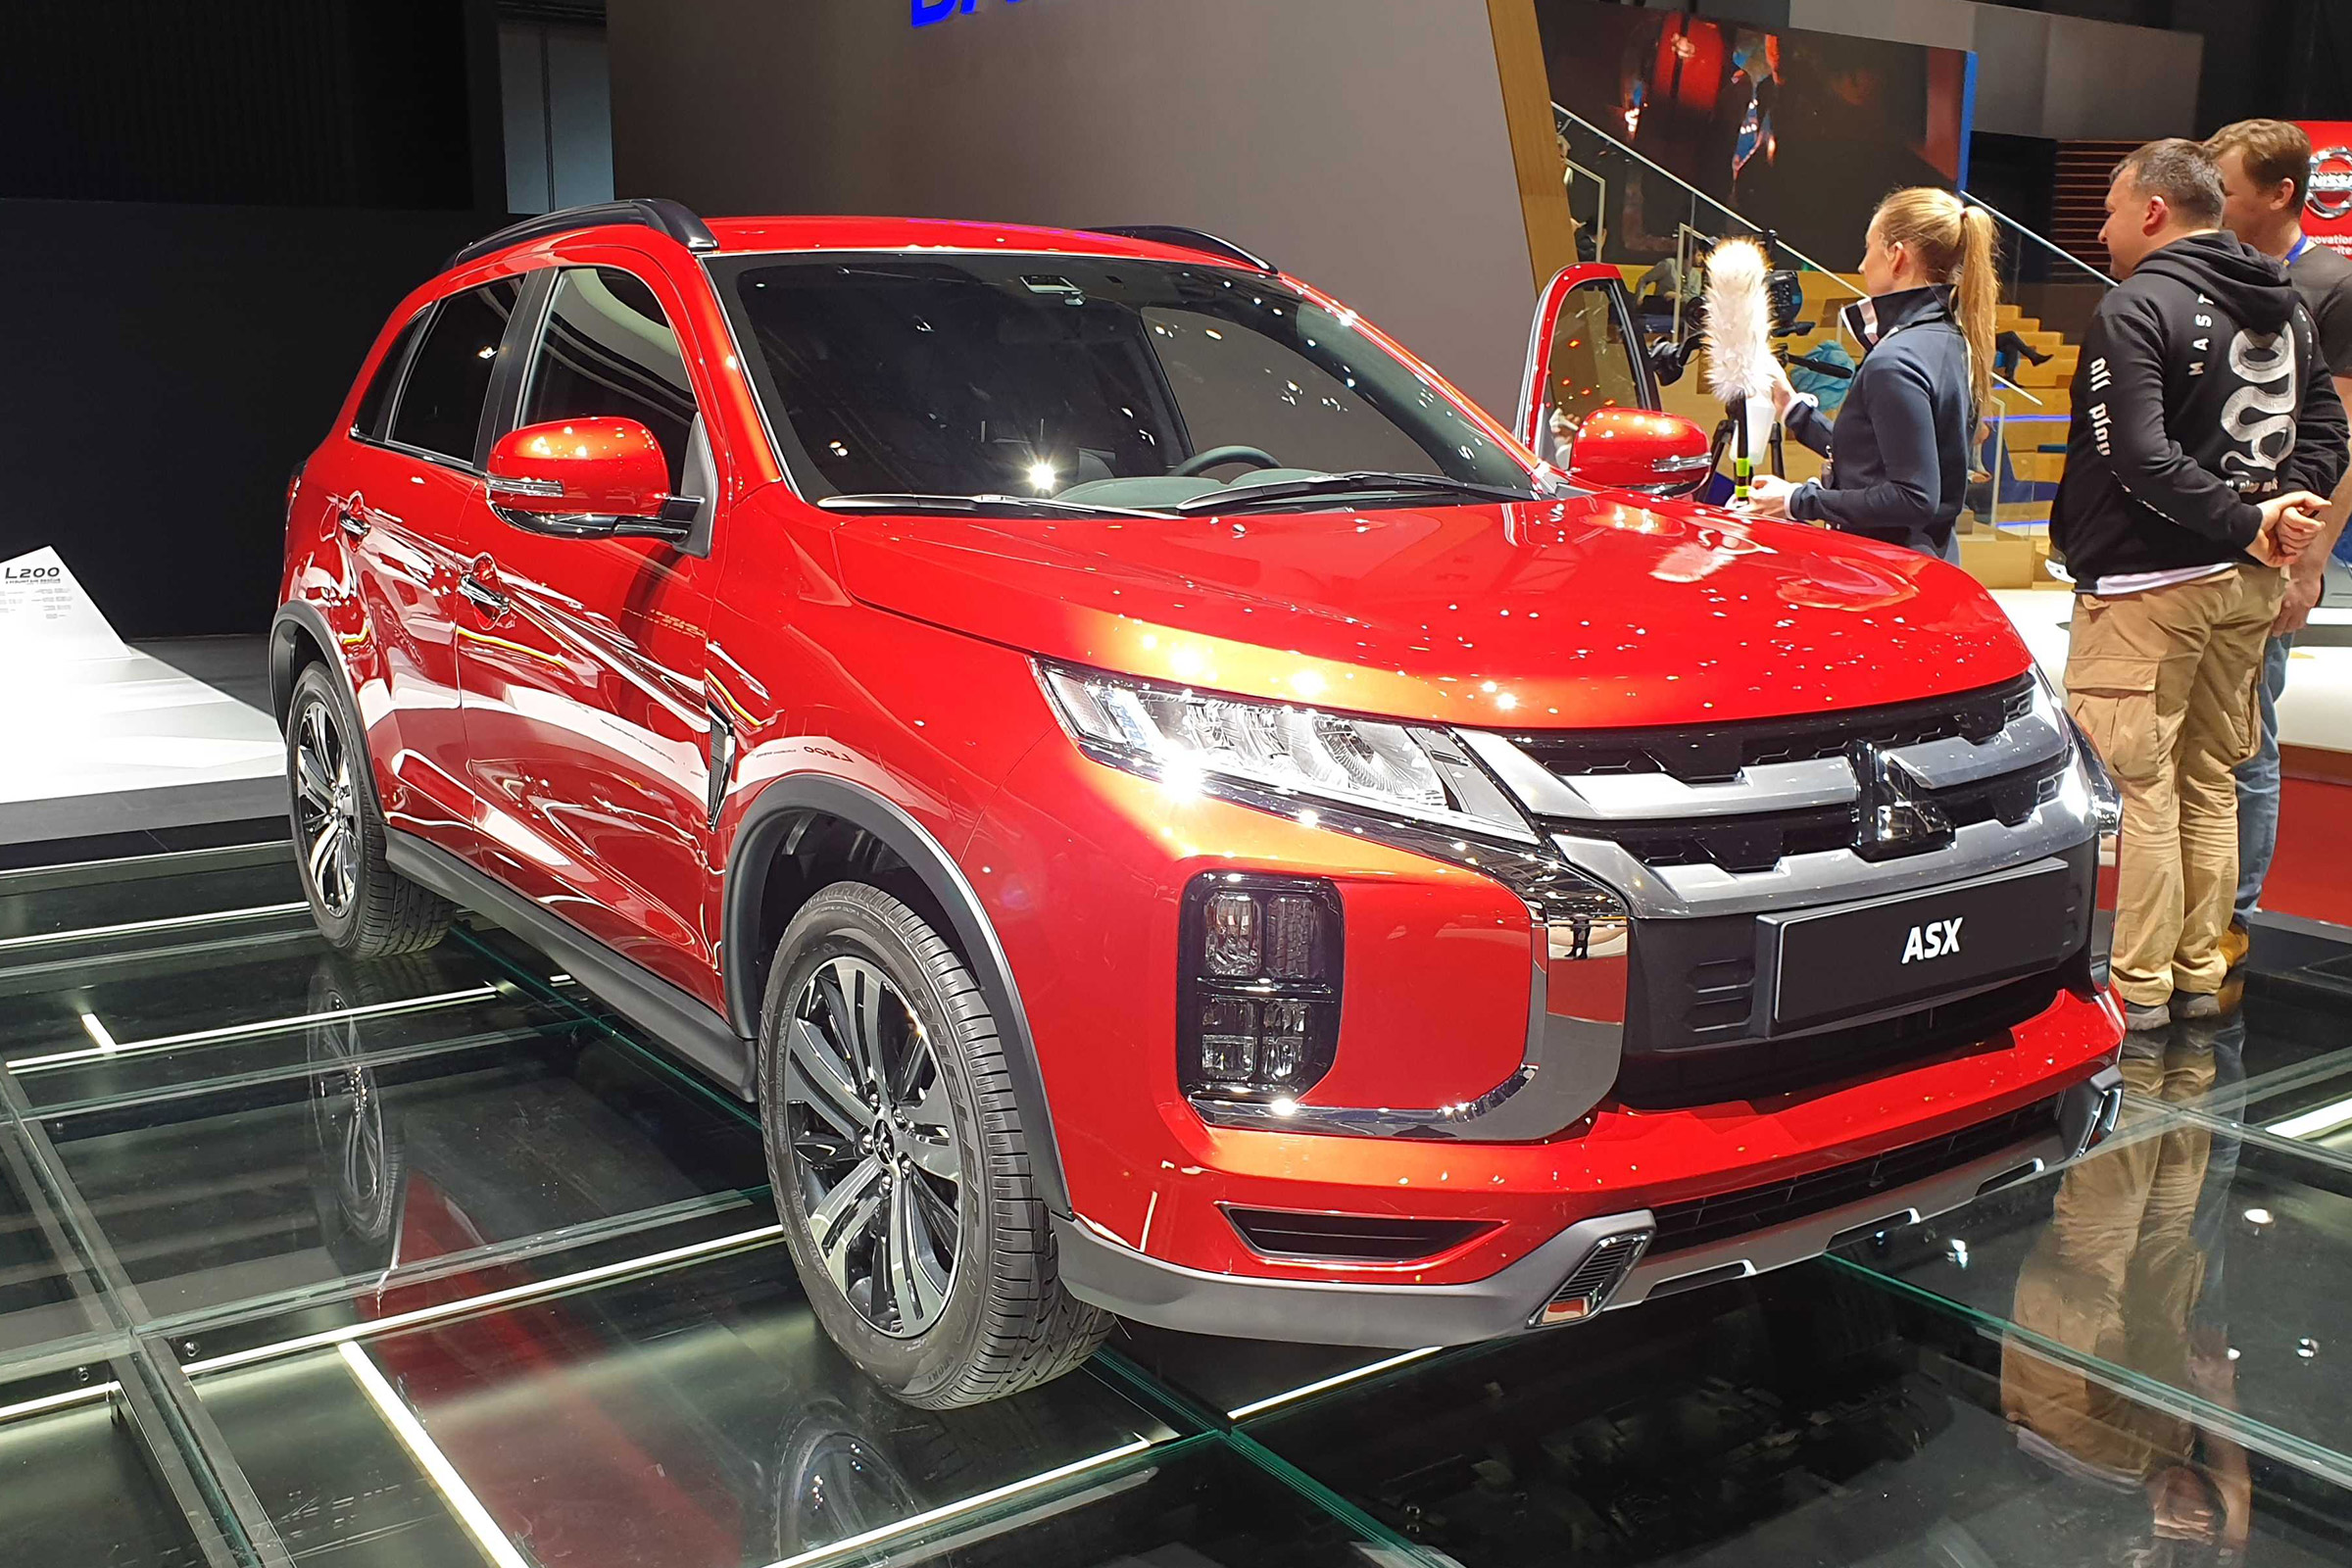 New 2020 Mitsubishi ASX on sale in September  Auto Express